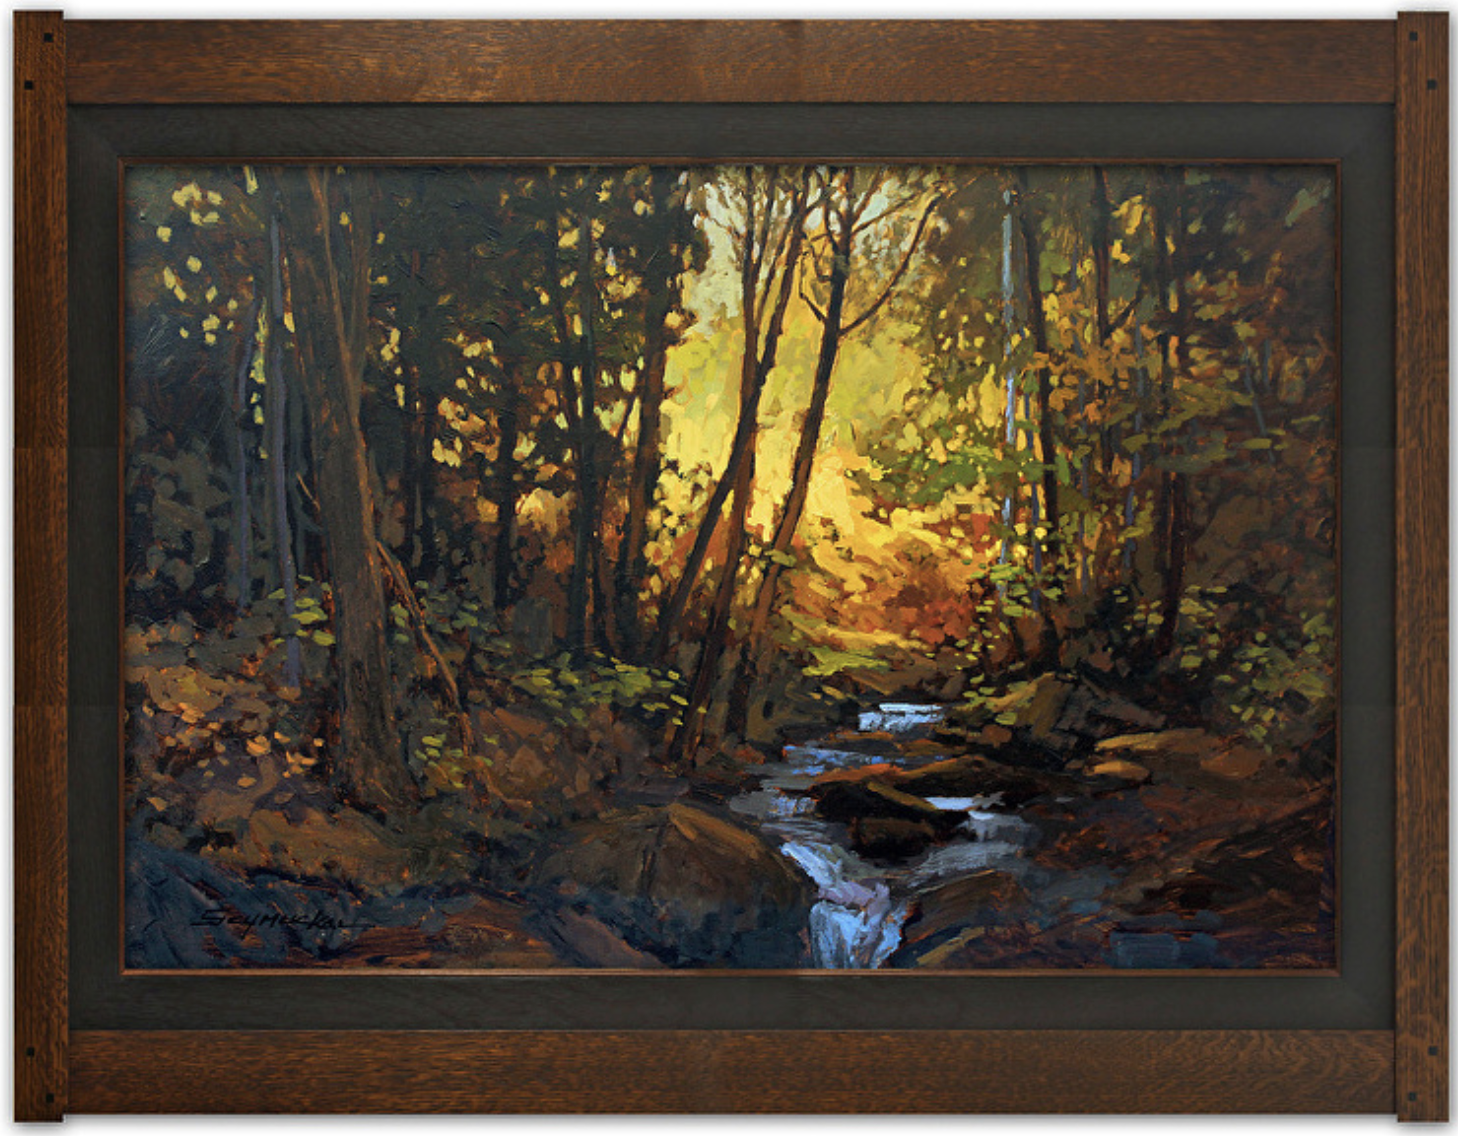 An oil painting of a creek winding through the forest with a sunrise glowing warmly in the background. 